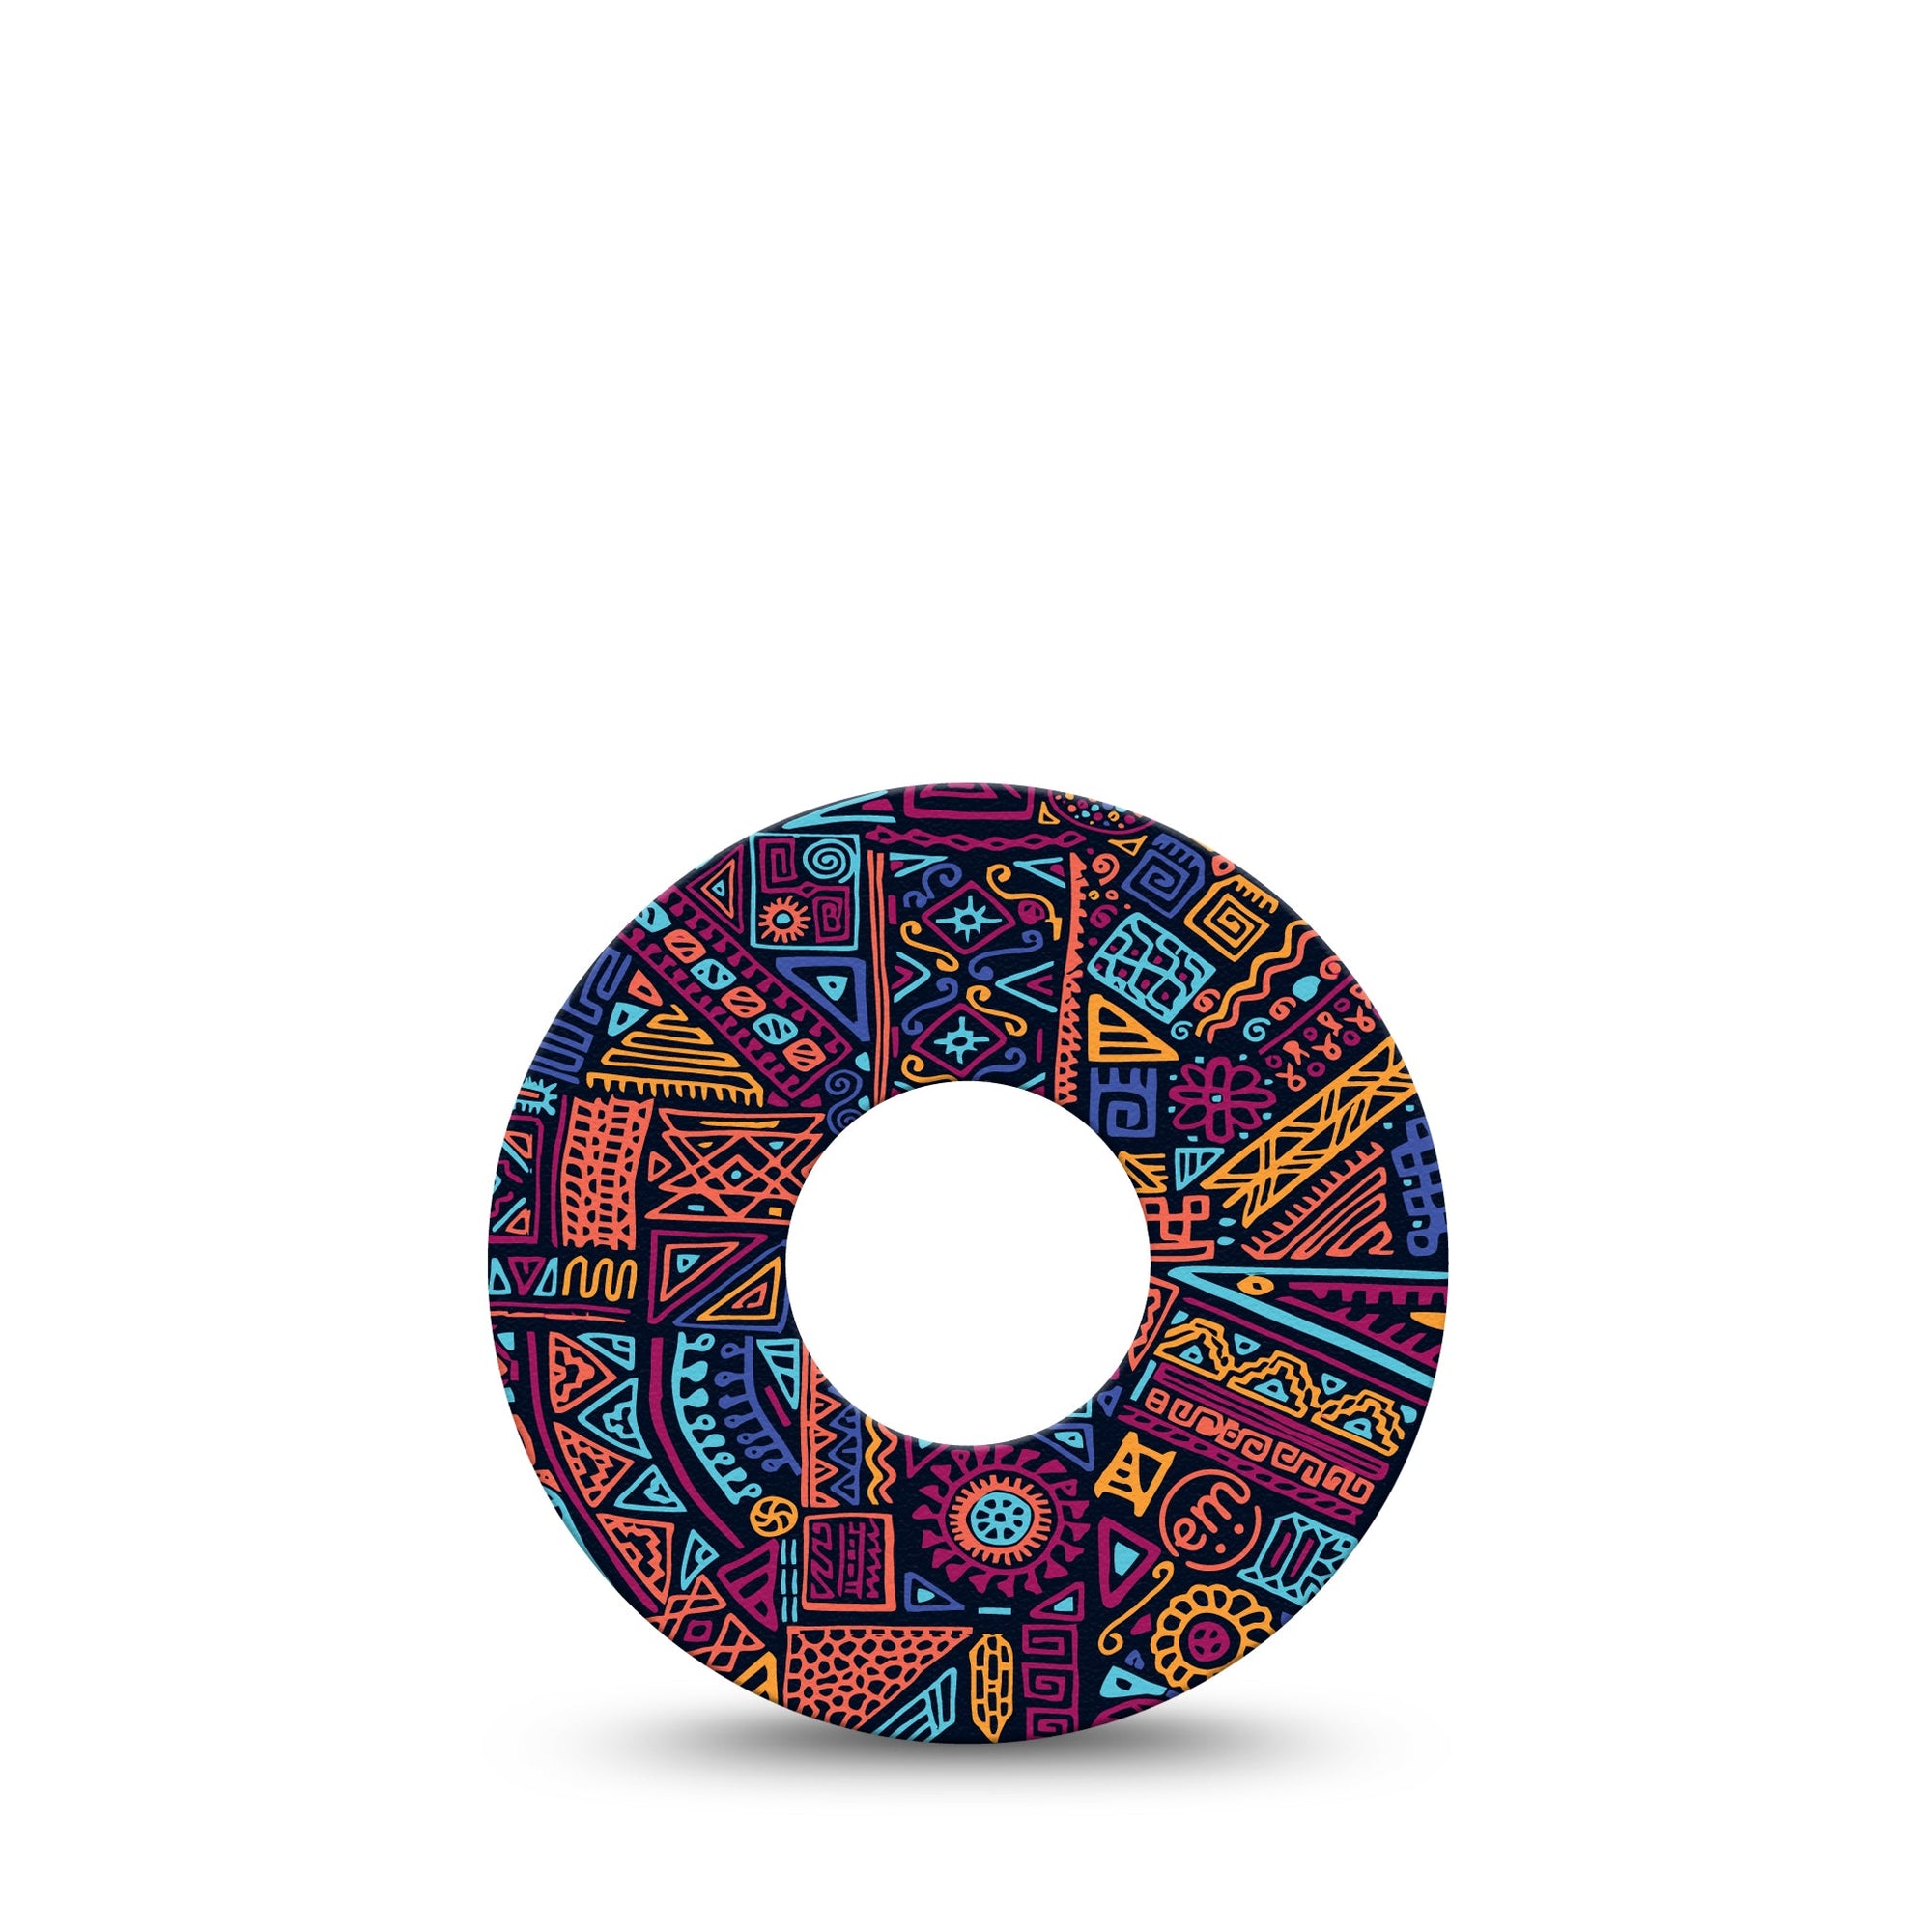 ExpressionMed Geometric Neon Infusion Tape Colorful Ethnic Painting, CGM Overlay Patch Design